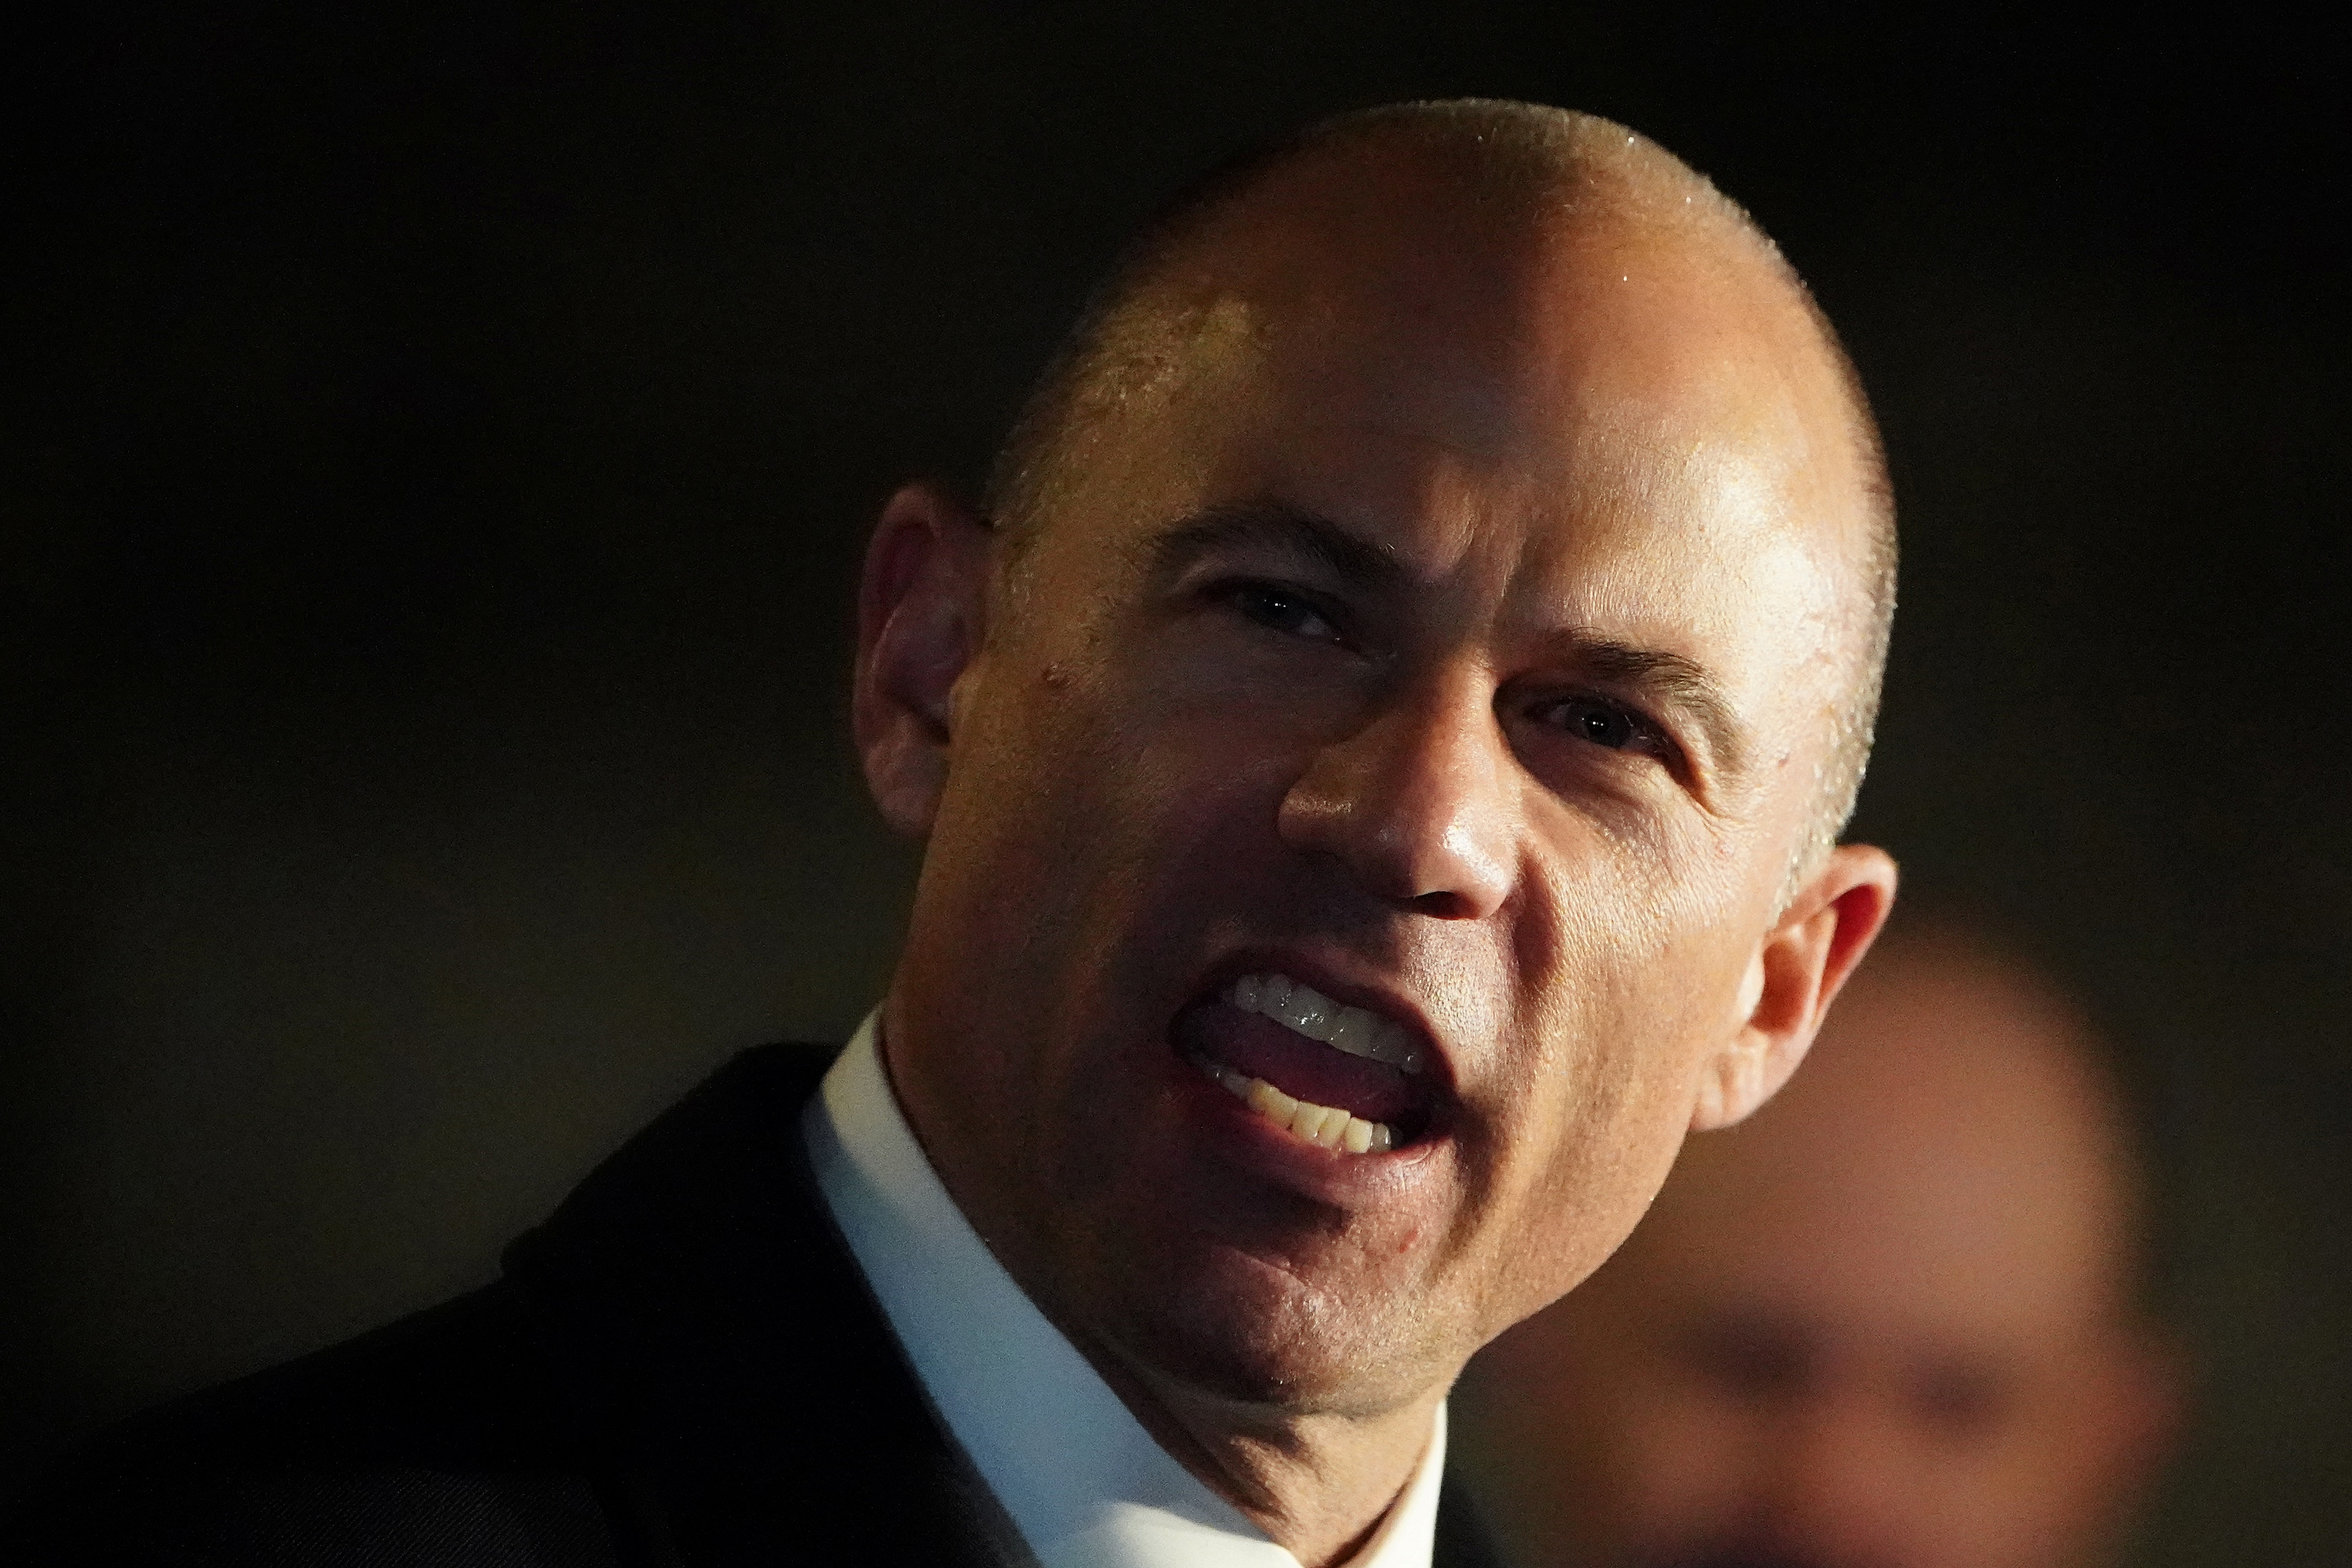 Lawyer Michael Avenatti speaks to the media after he walks out of federal court in New York, New York, U.S., March 25, 2019. REUTERS/Carlo Allegri